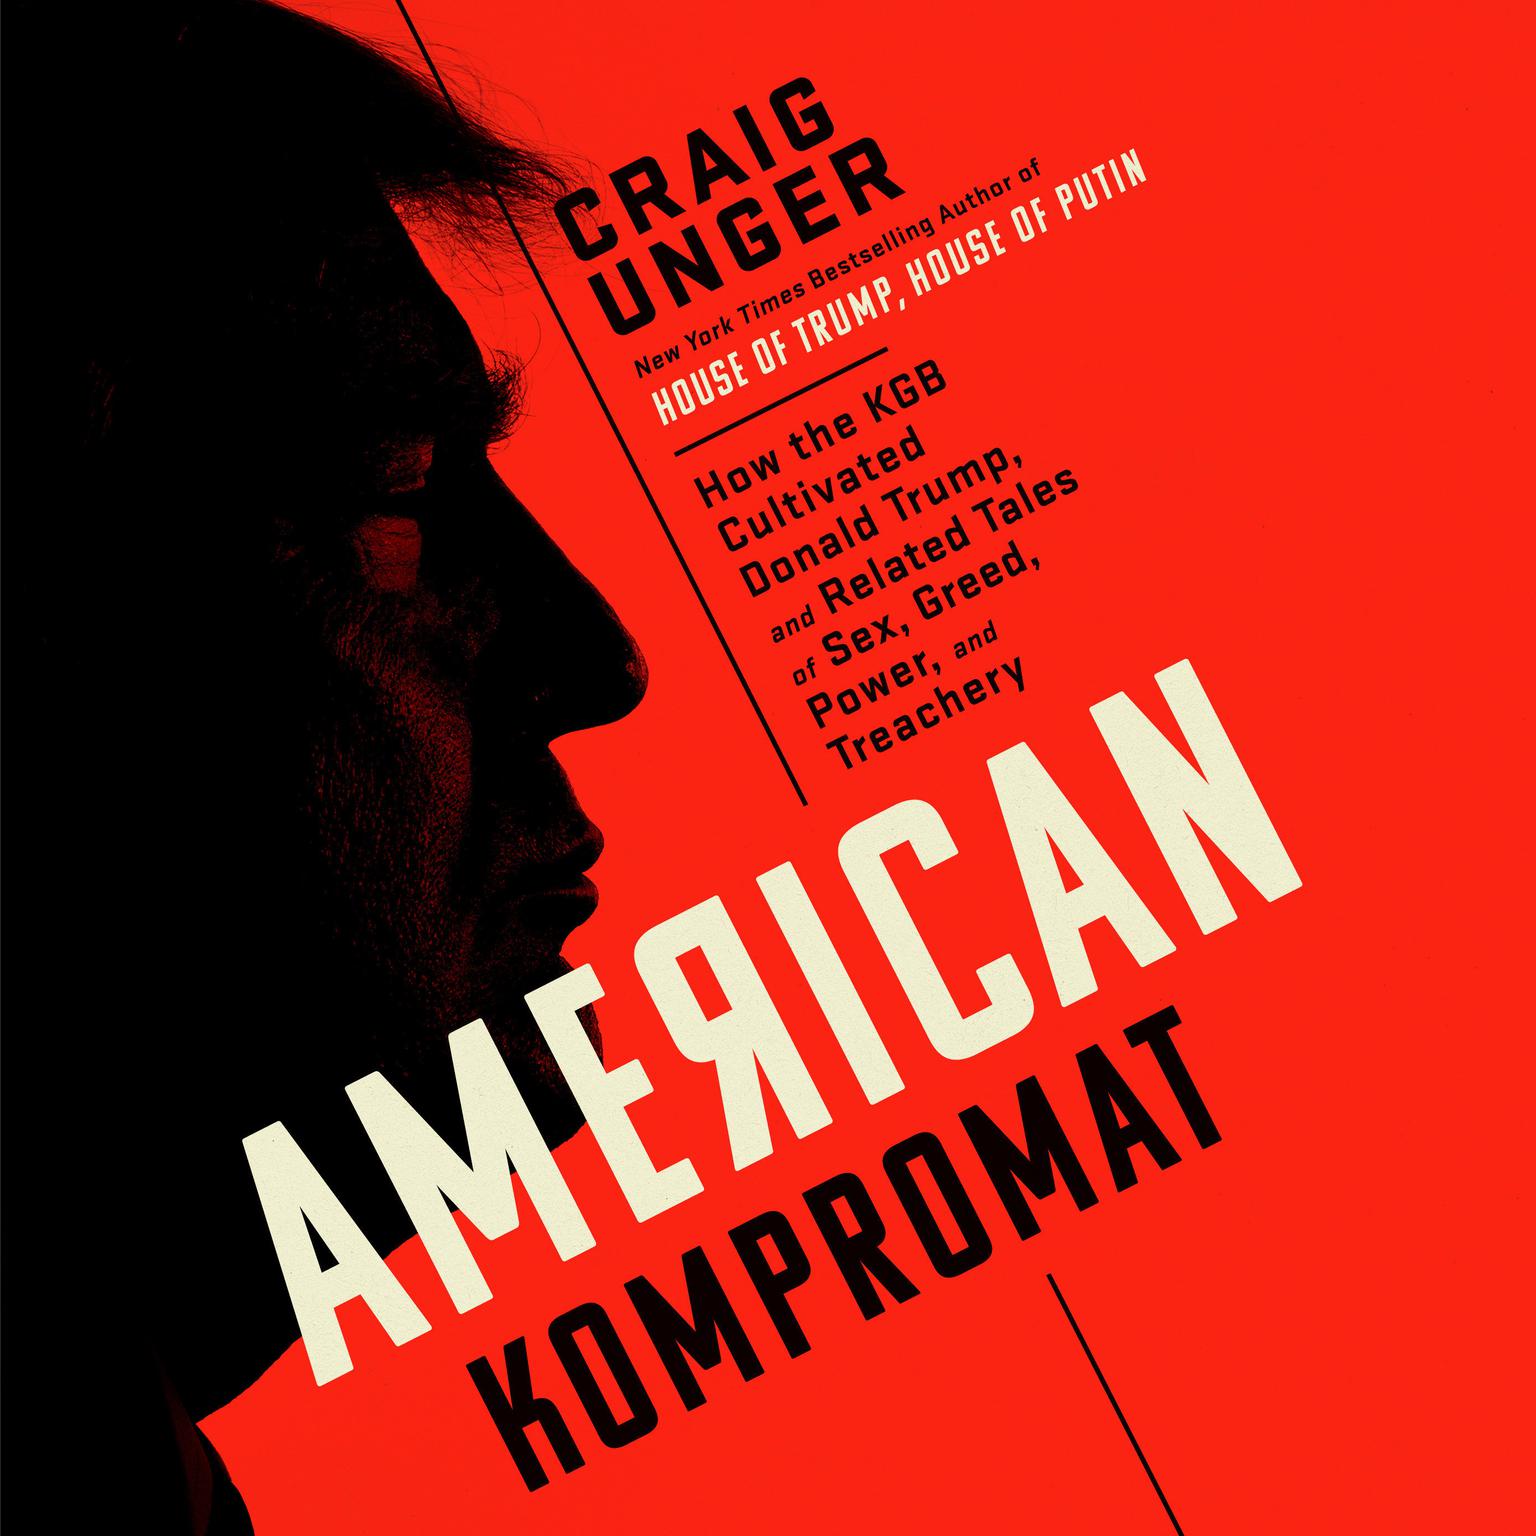 American Kompromat: How the KGB Cultivated Donald Trump, and Related Tales of Sex, Greed, Power, and Treachery Audiobook, by Craig Unger